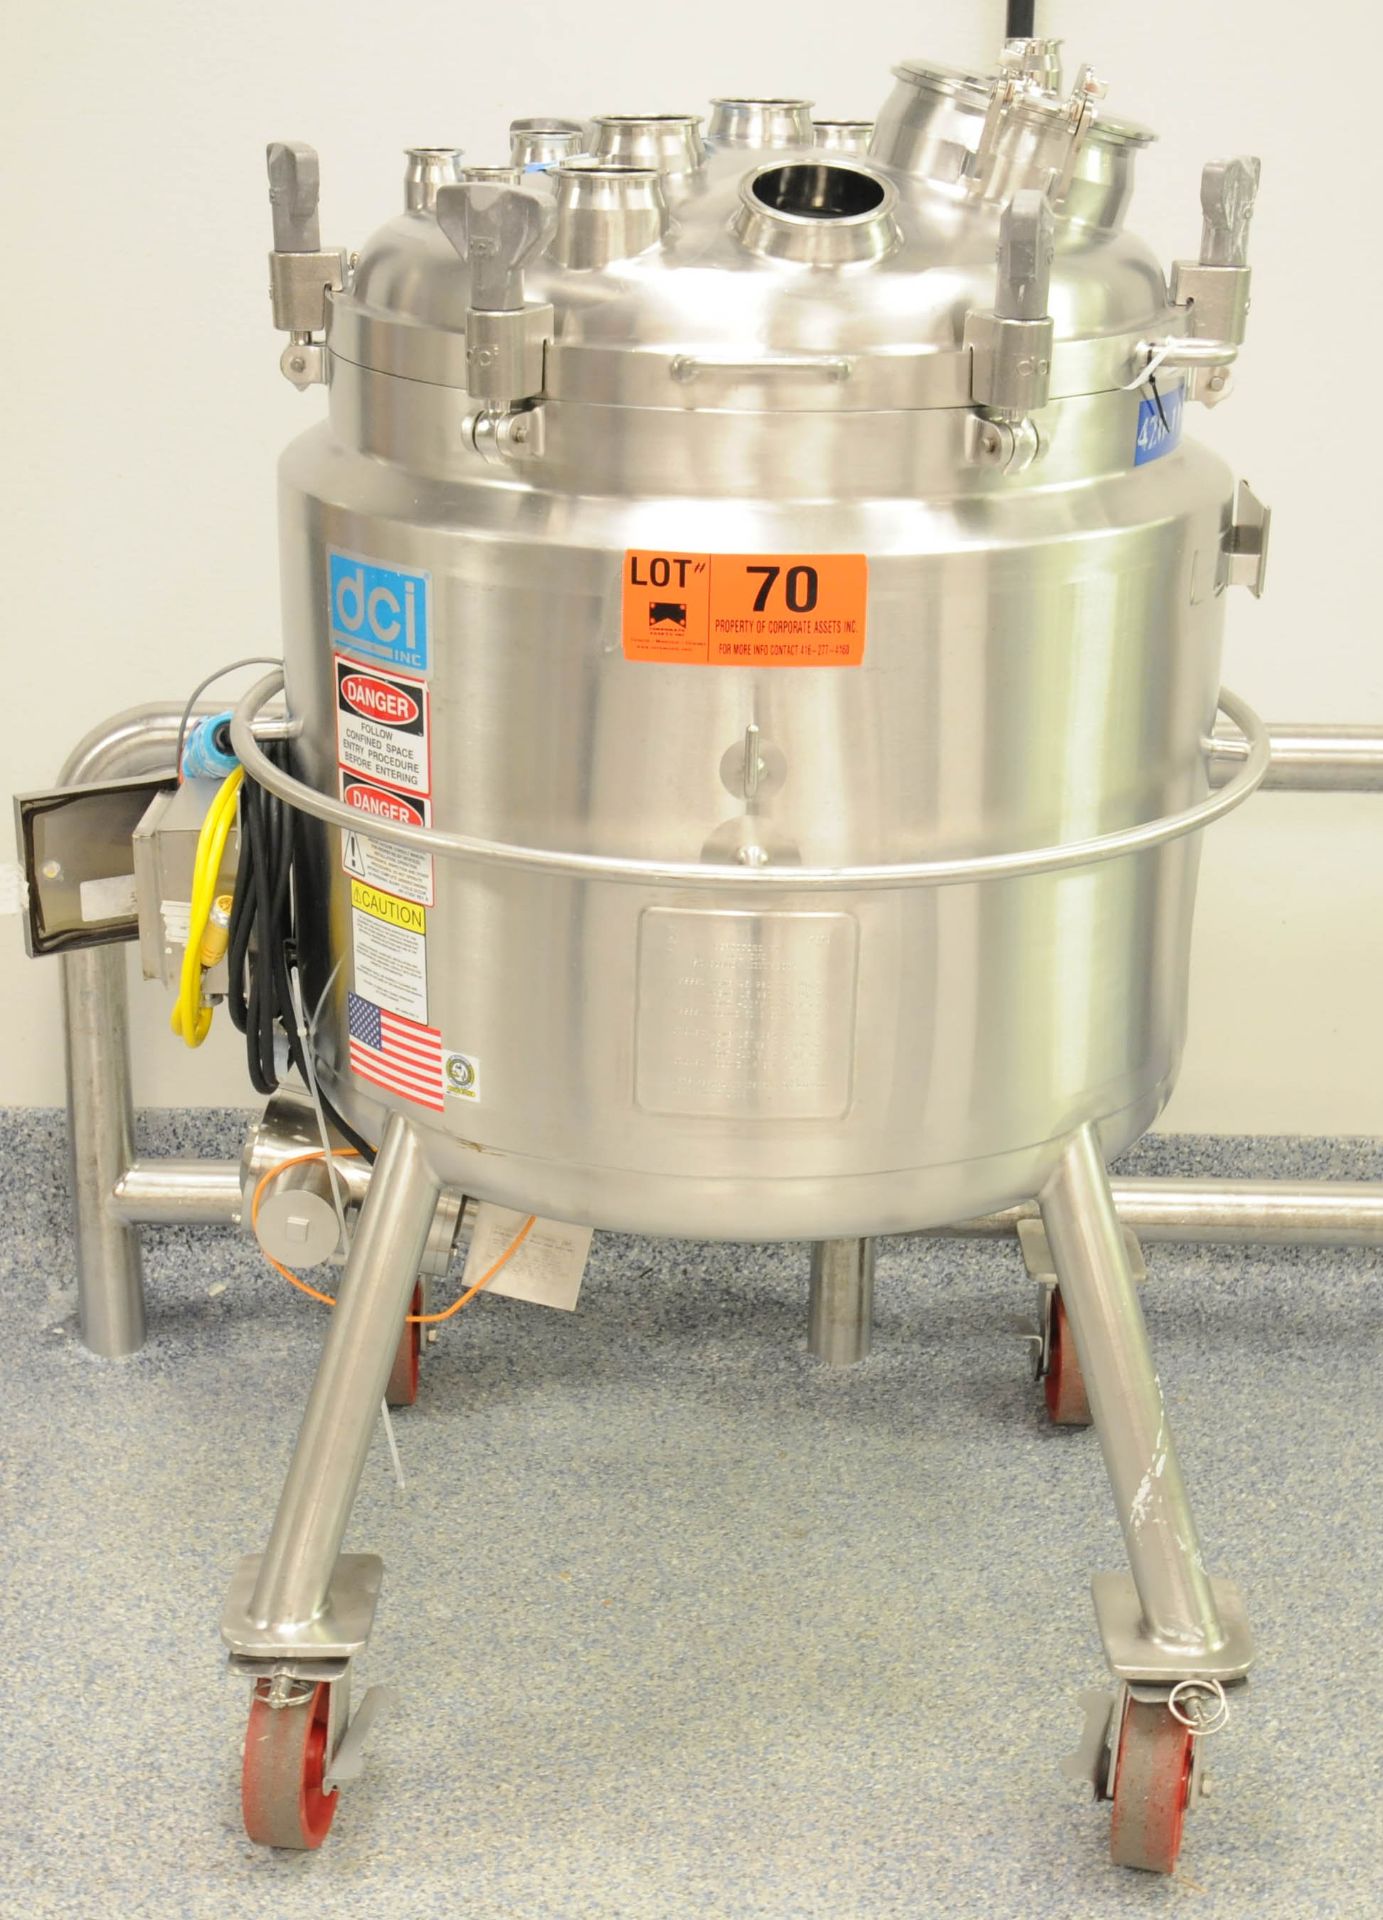 DCI (2009) AHF-M NANO PORTABLE JACKETED STAINLESS STEEL REACTOR VESSEL WITH 200 LITER CAPACITY, 45